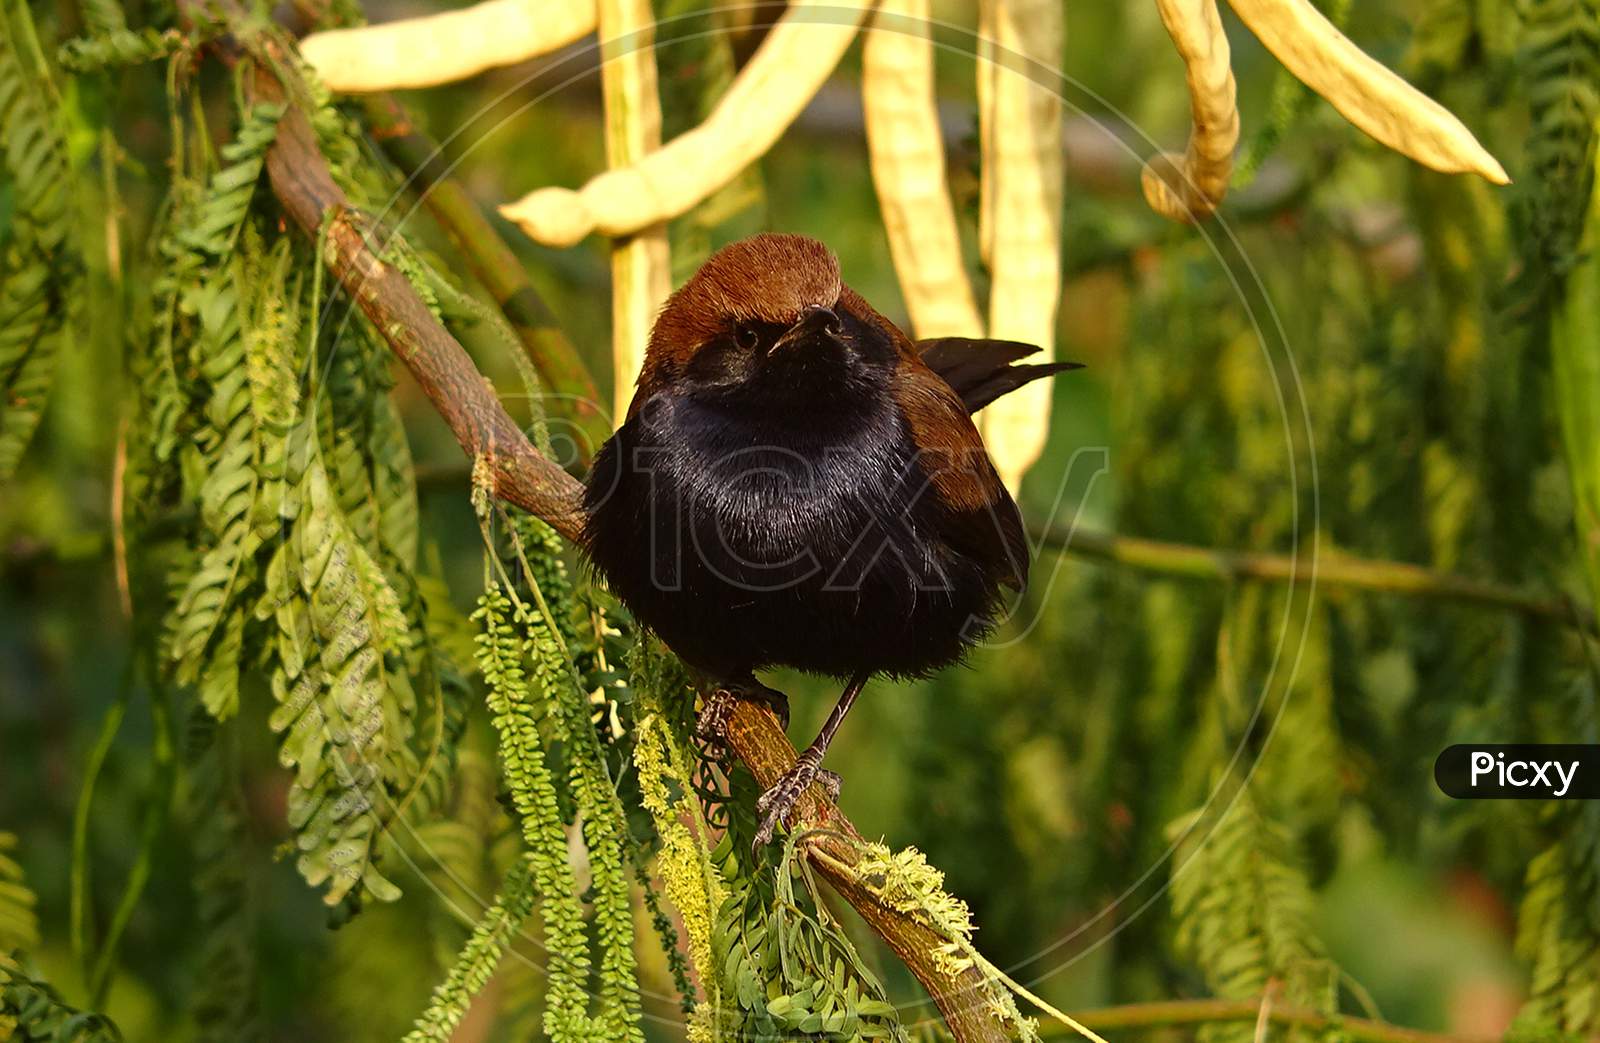 A beautiful black bird with brown head sitting on a small tree branch . Bird have a glossy black body and a brown head.